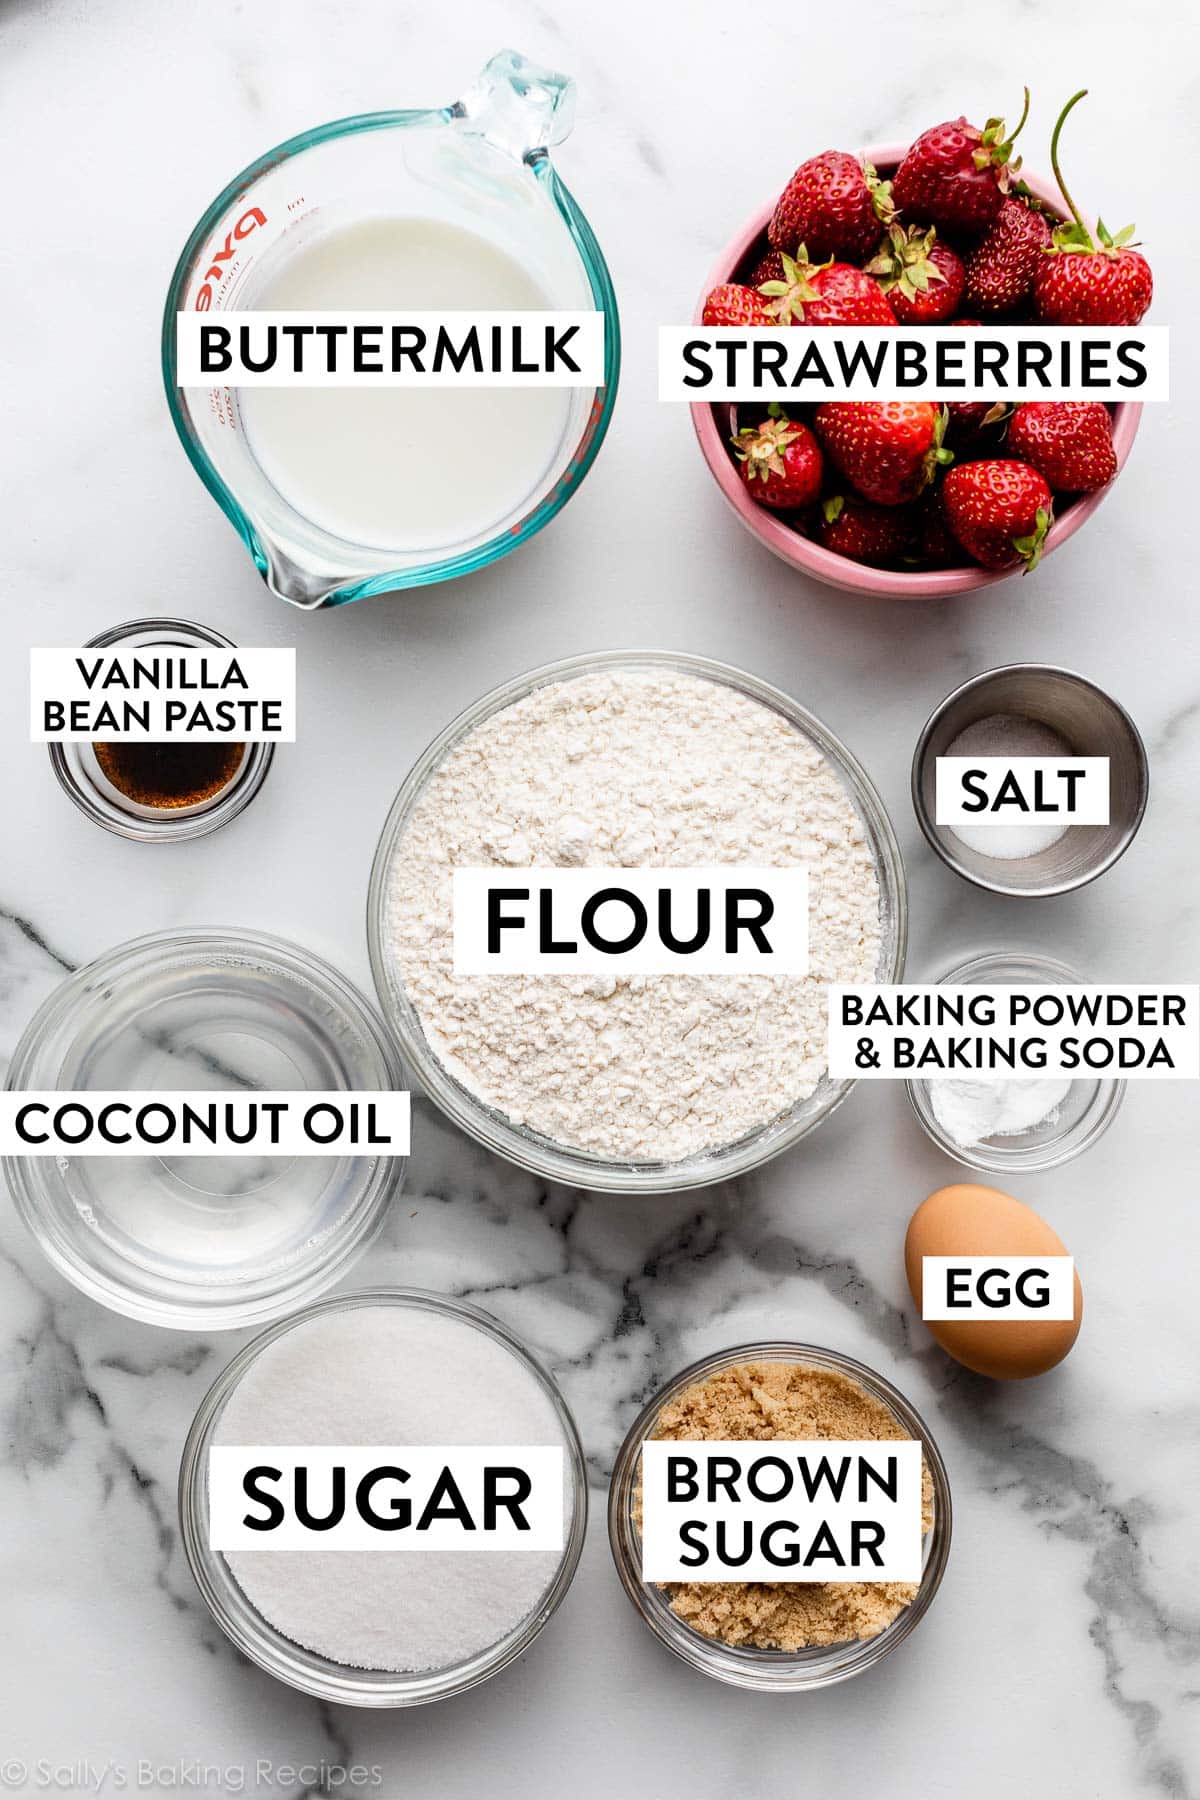 ingredients in bowls on counter including strawberries, buttermilk, flour, egg, brown sugar, sugar, melted coconut oil, and vanilla bean paste.